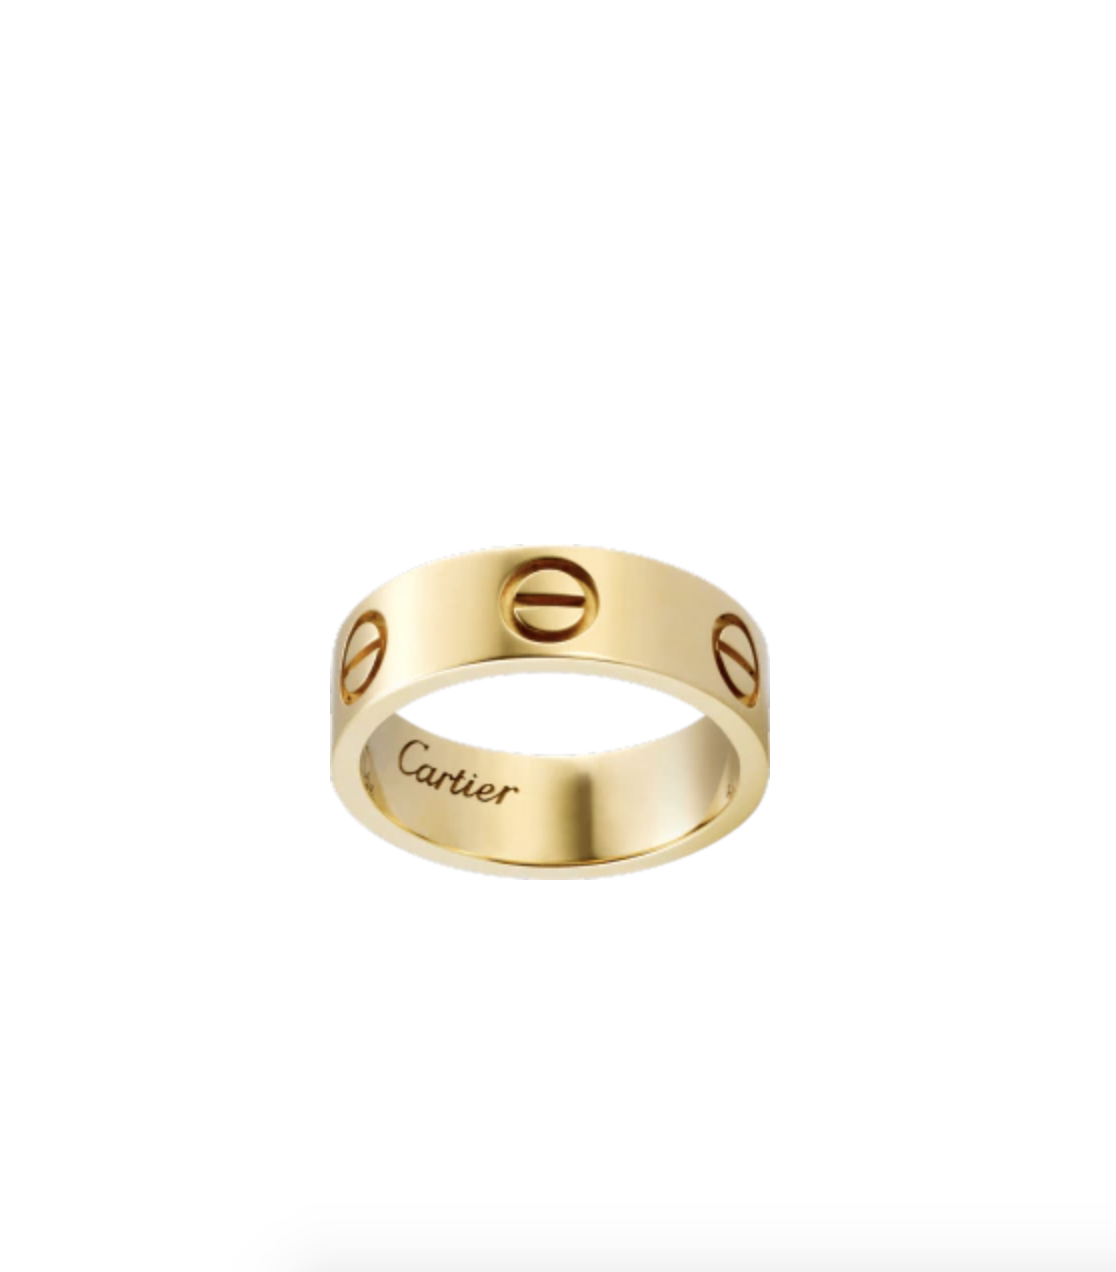 where to buy cartier ring